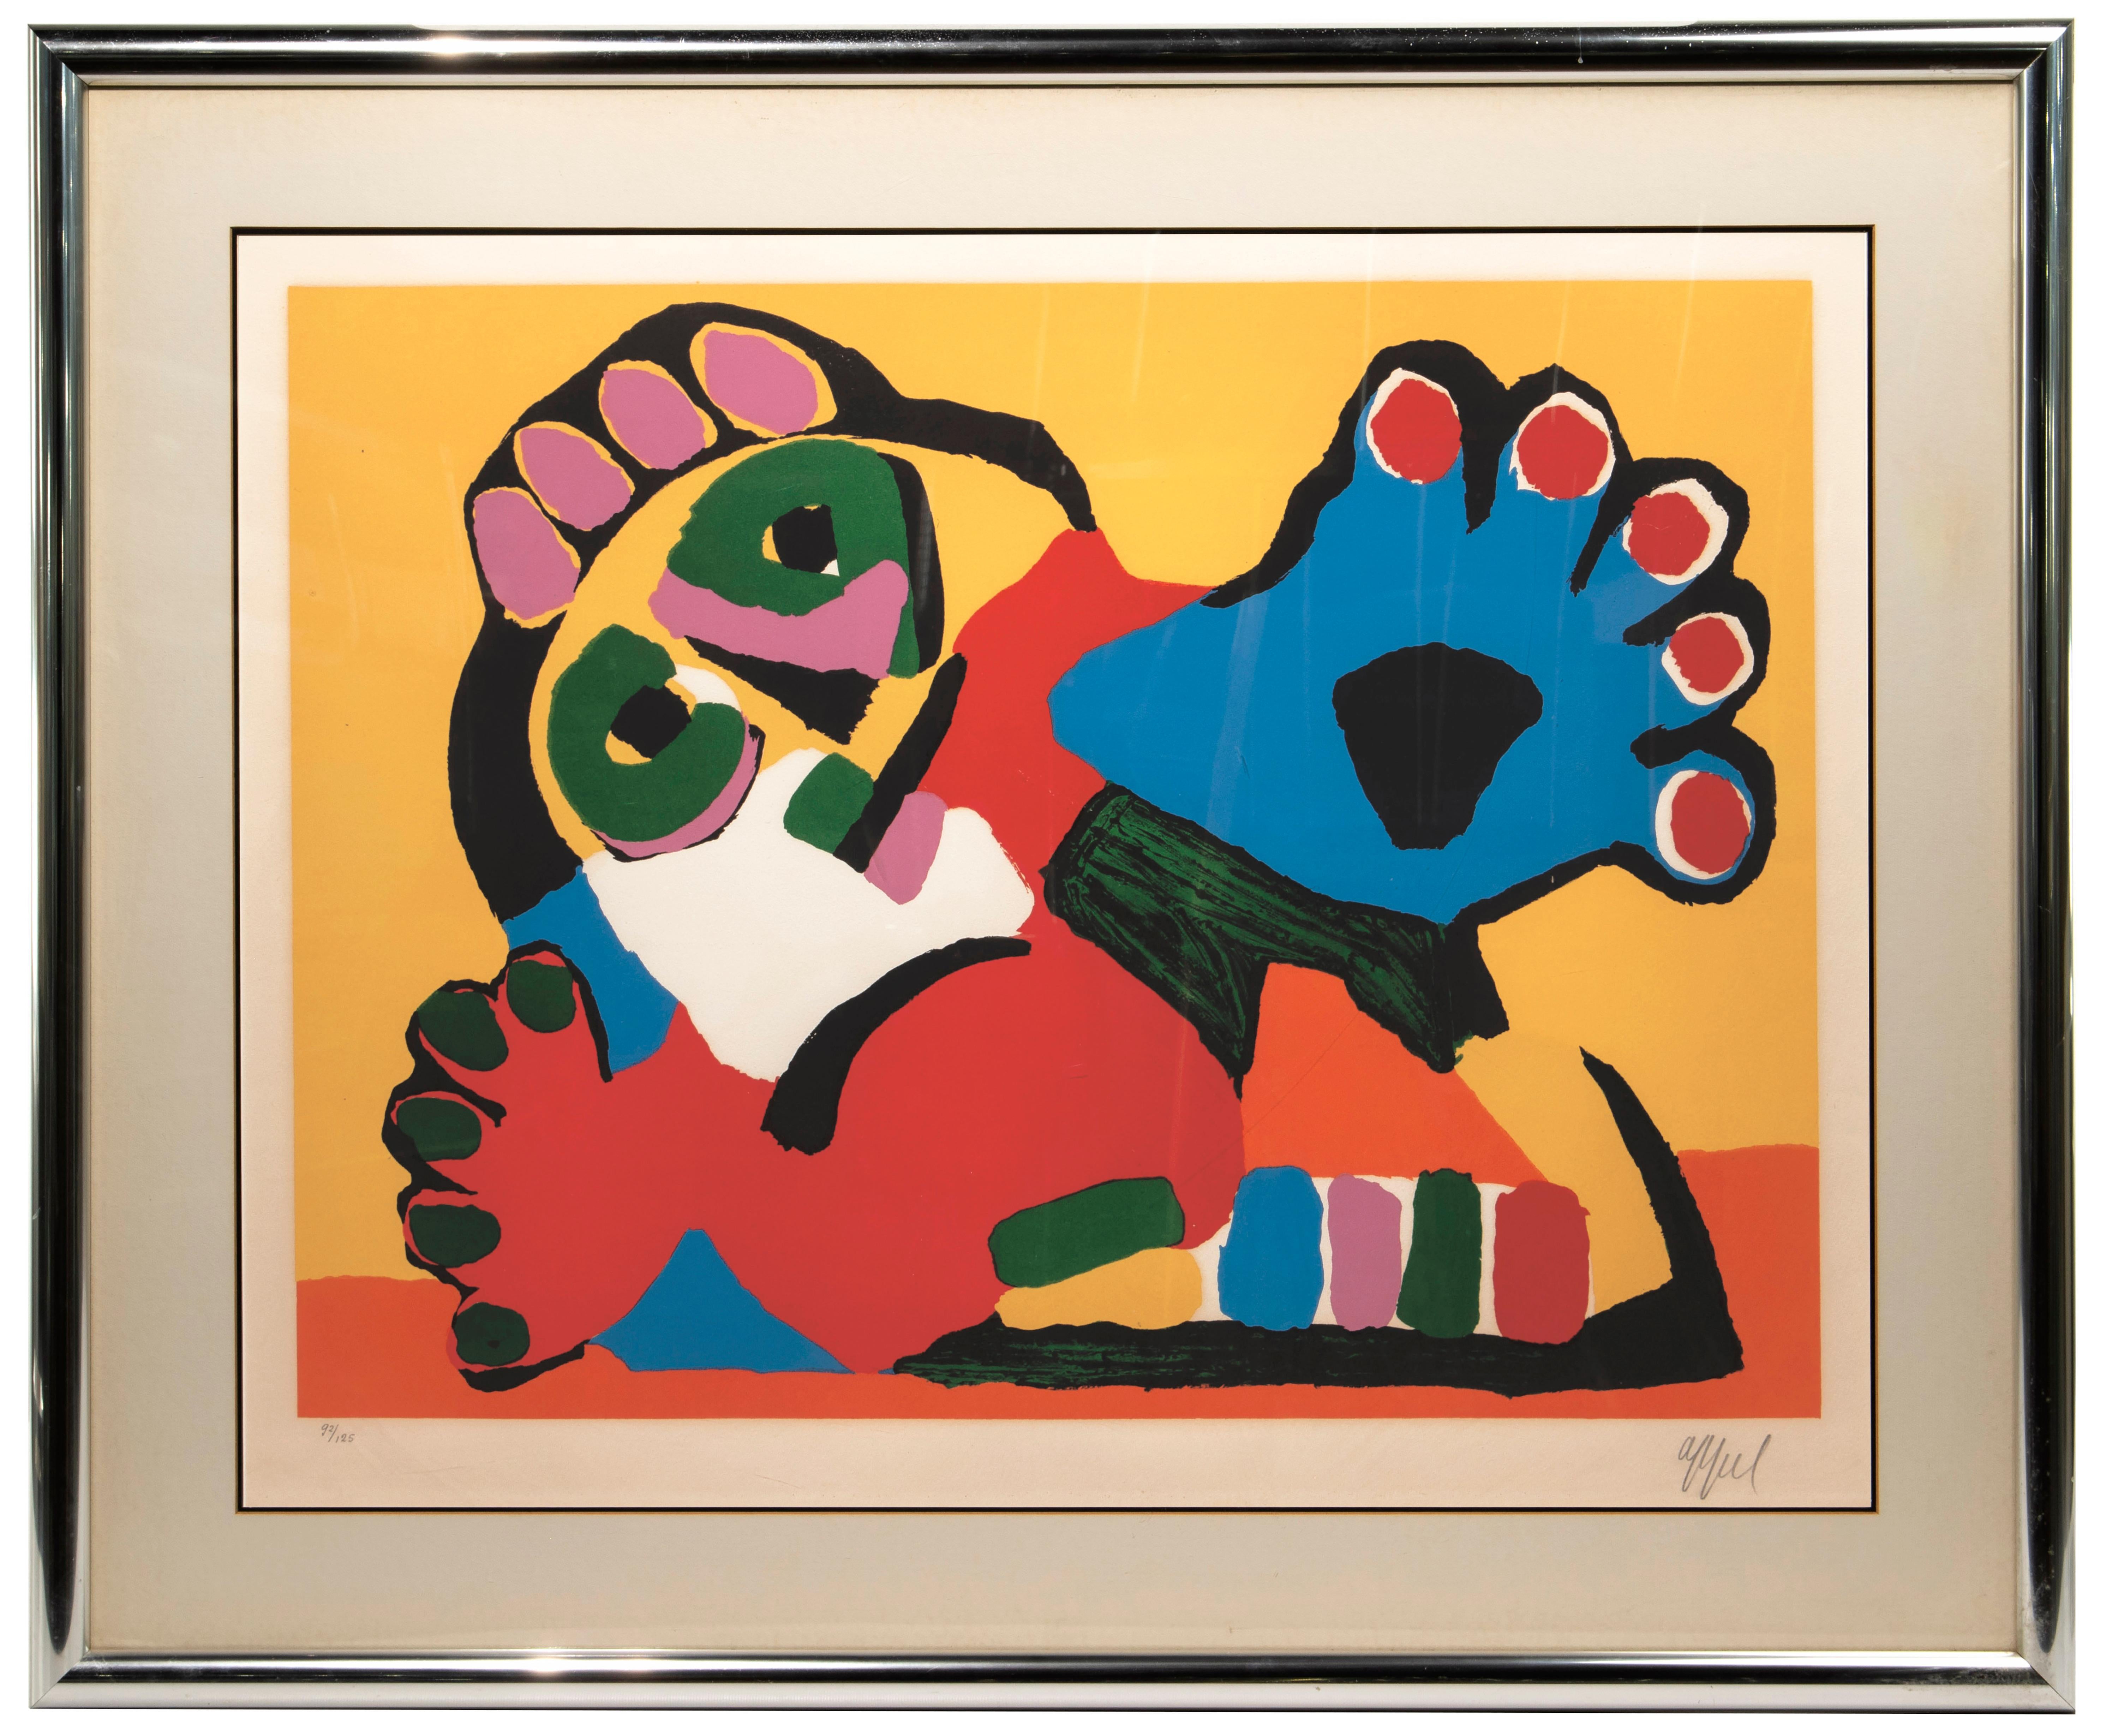 Artist: Karel Appel 
Pencil signed lower right corner
Edition: Pencil #92/125 lower left
Description: Depicting and abstracted creature in bold, overlapping hues.   
Great vivid colors  and well presented in his framing work (frontal plexiglass in a